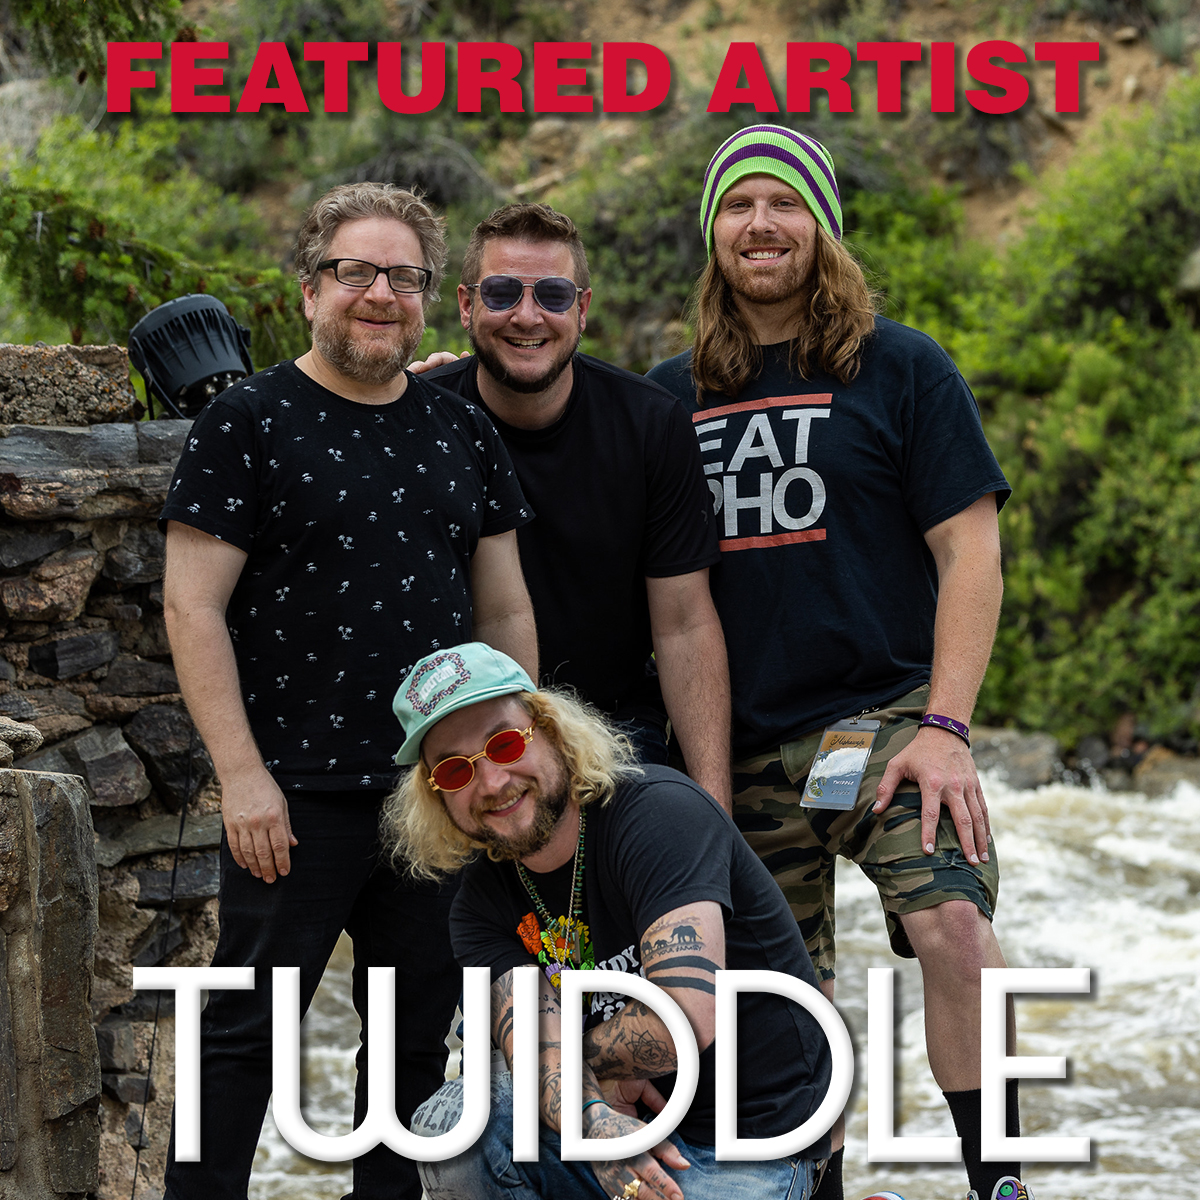 Fresh off the release of their new album, Every Last Leaf, we are excited to jam to @twiddlemusic all month as our Featured Artist! Stay tuned for more!